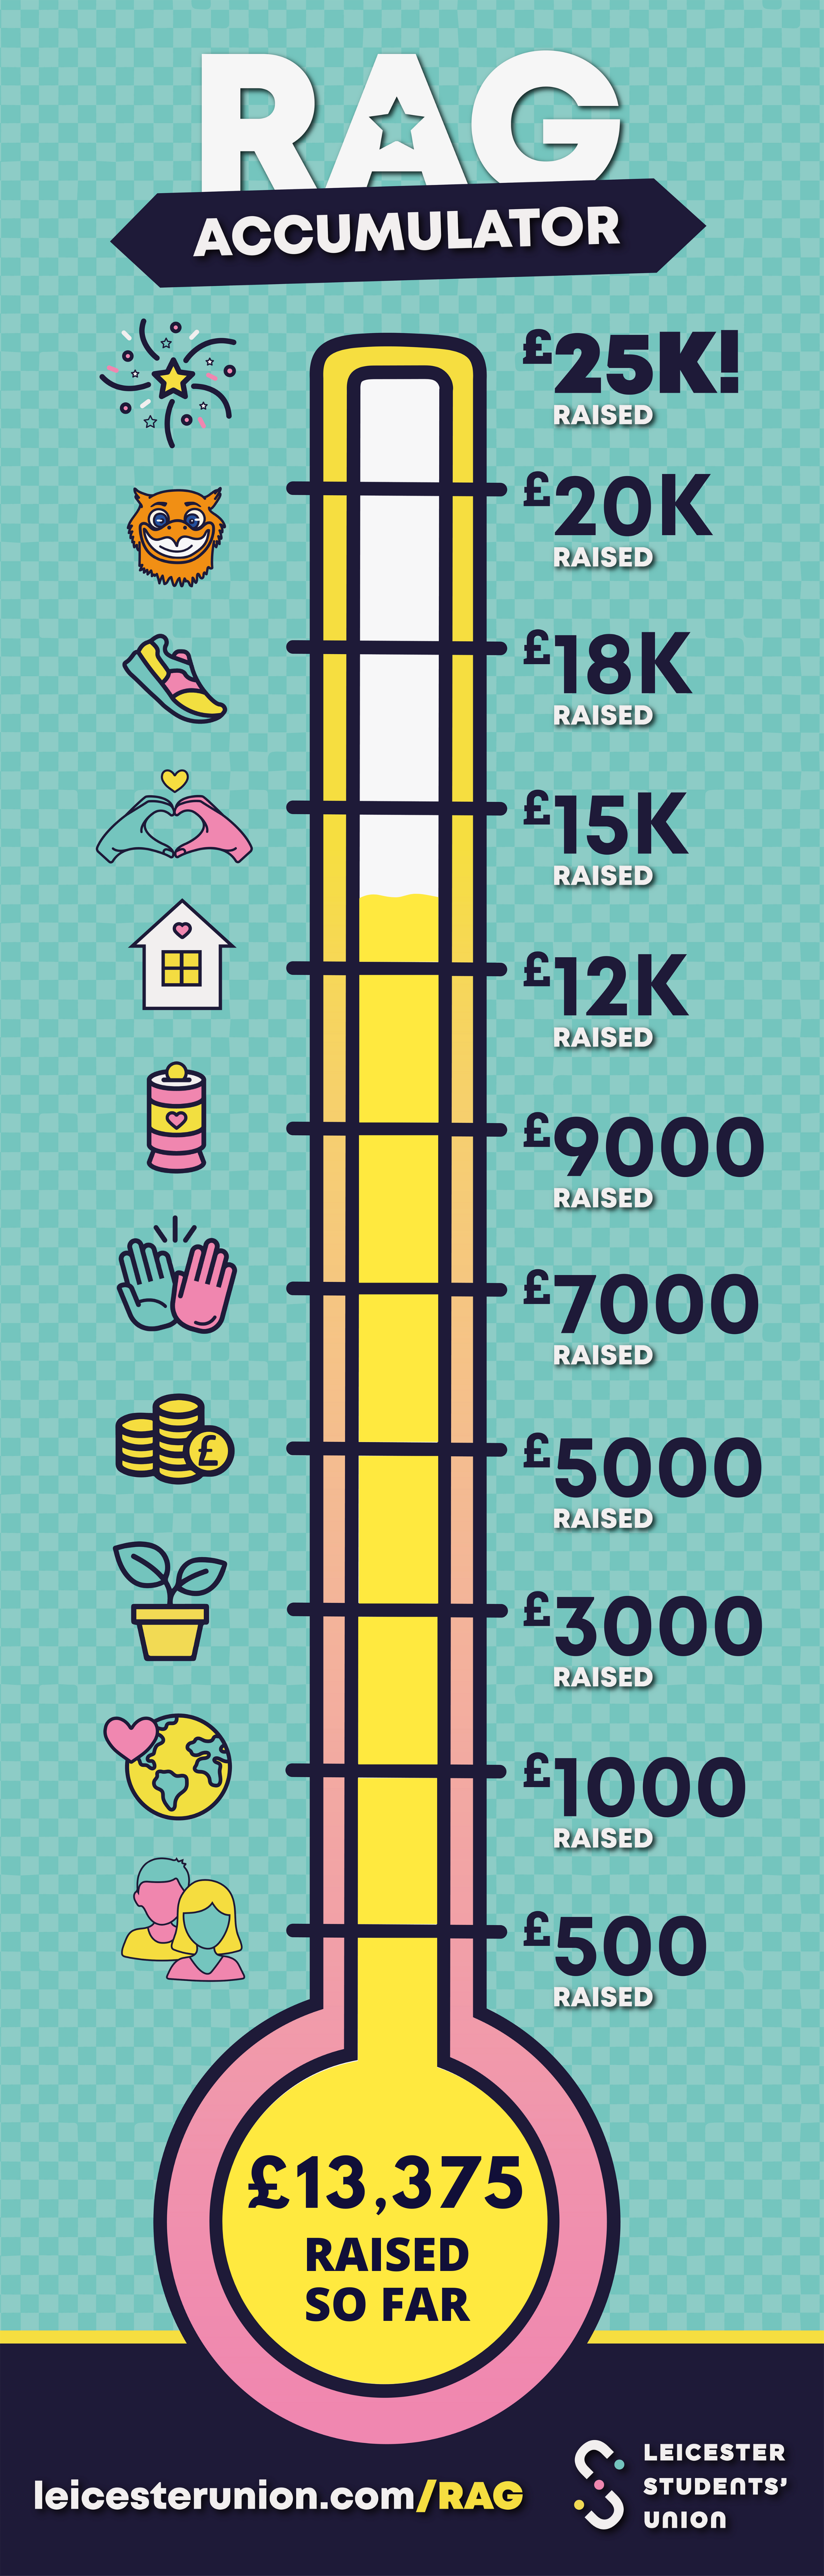 Fundraising thermometer showing £13375 raised so far this academic year.